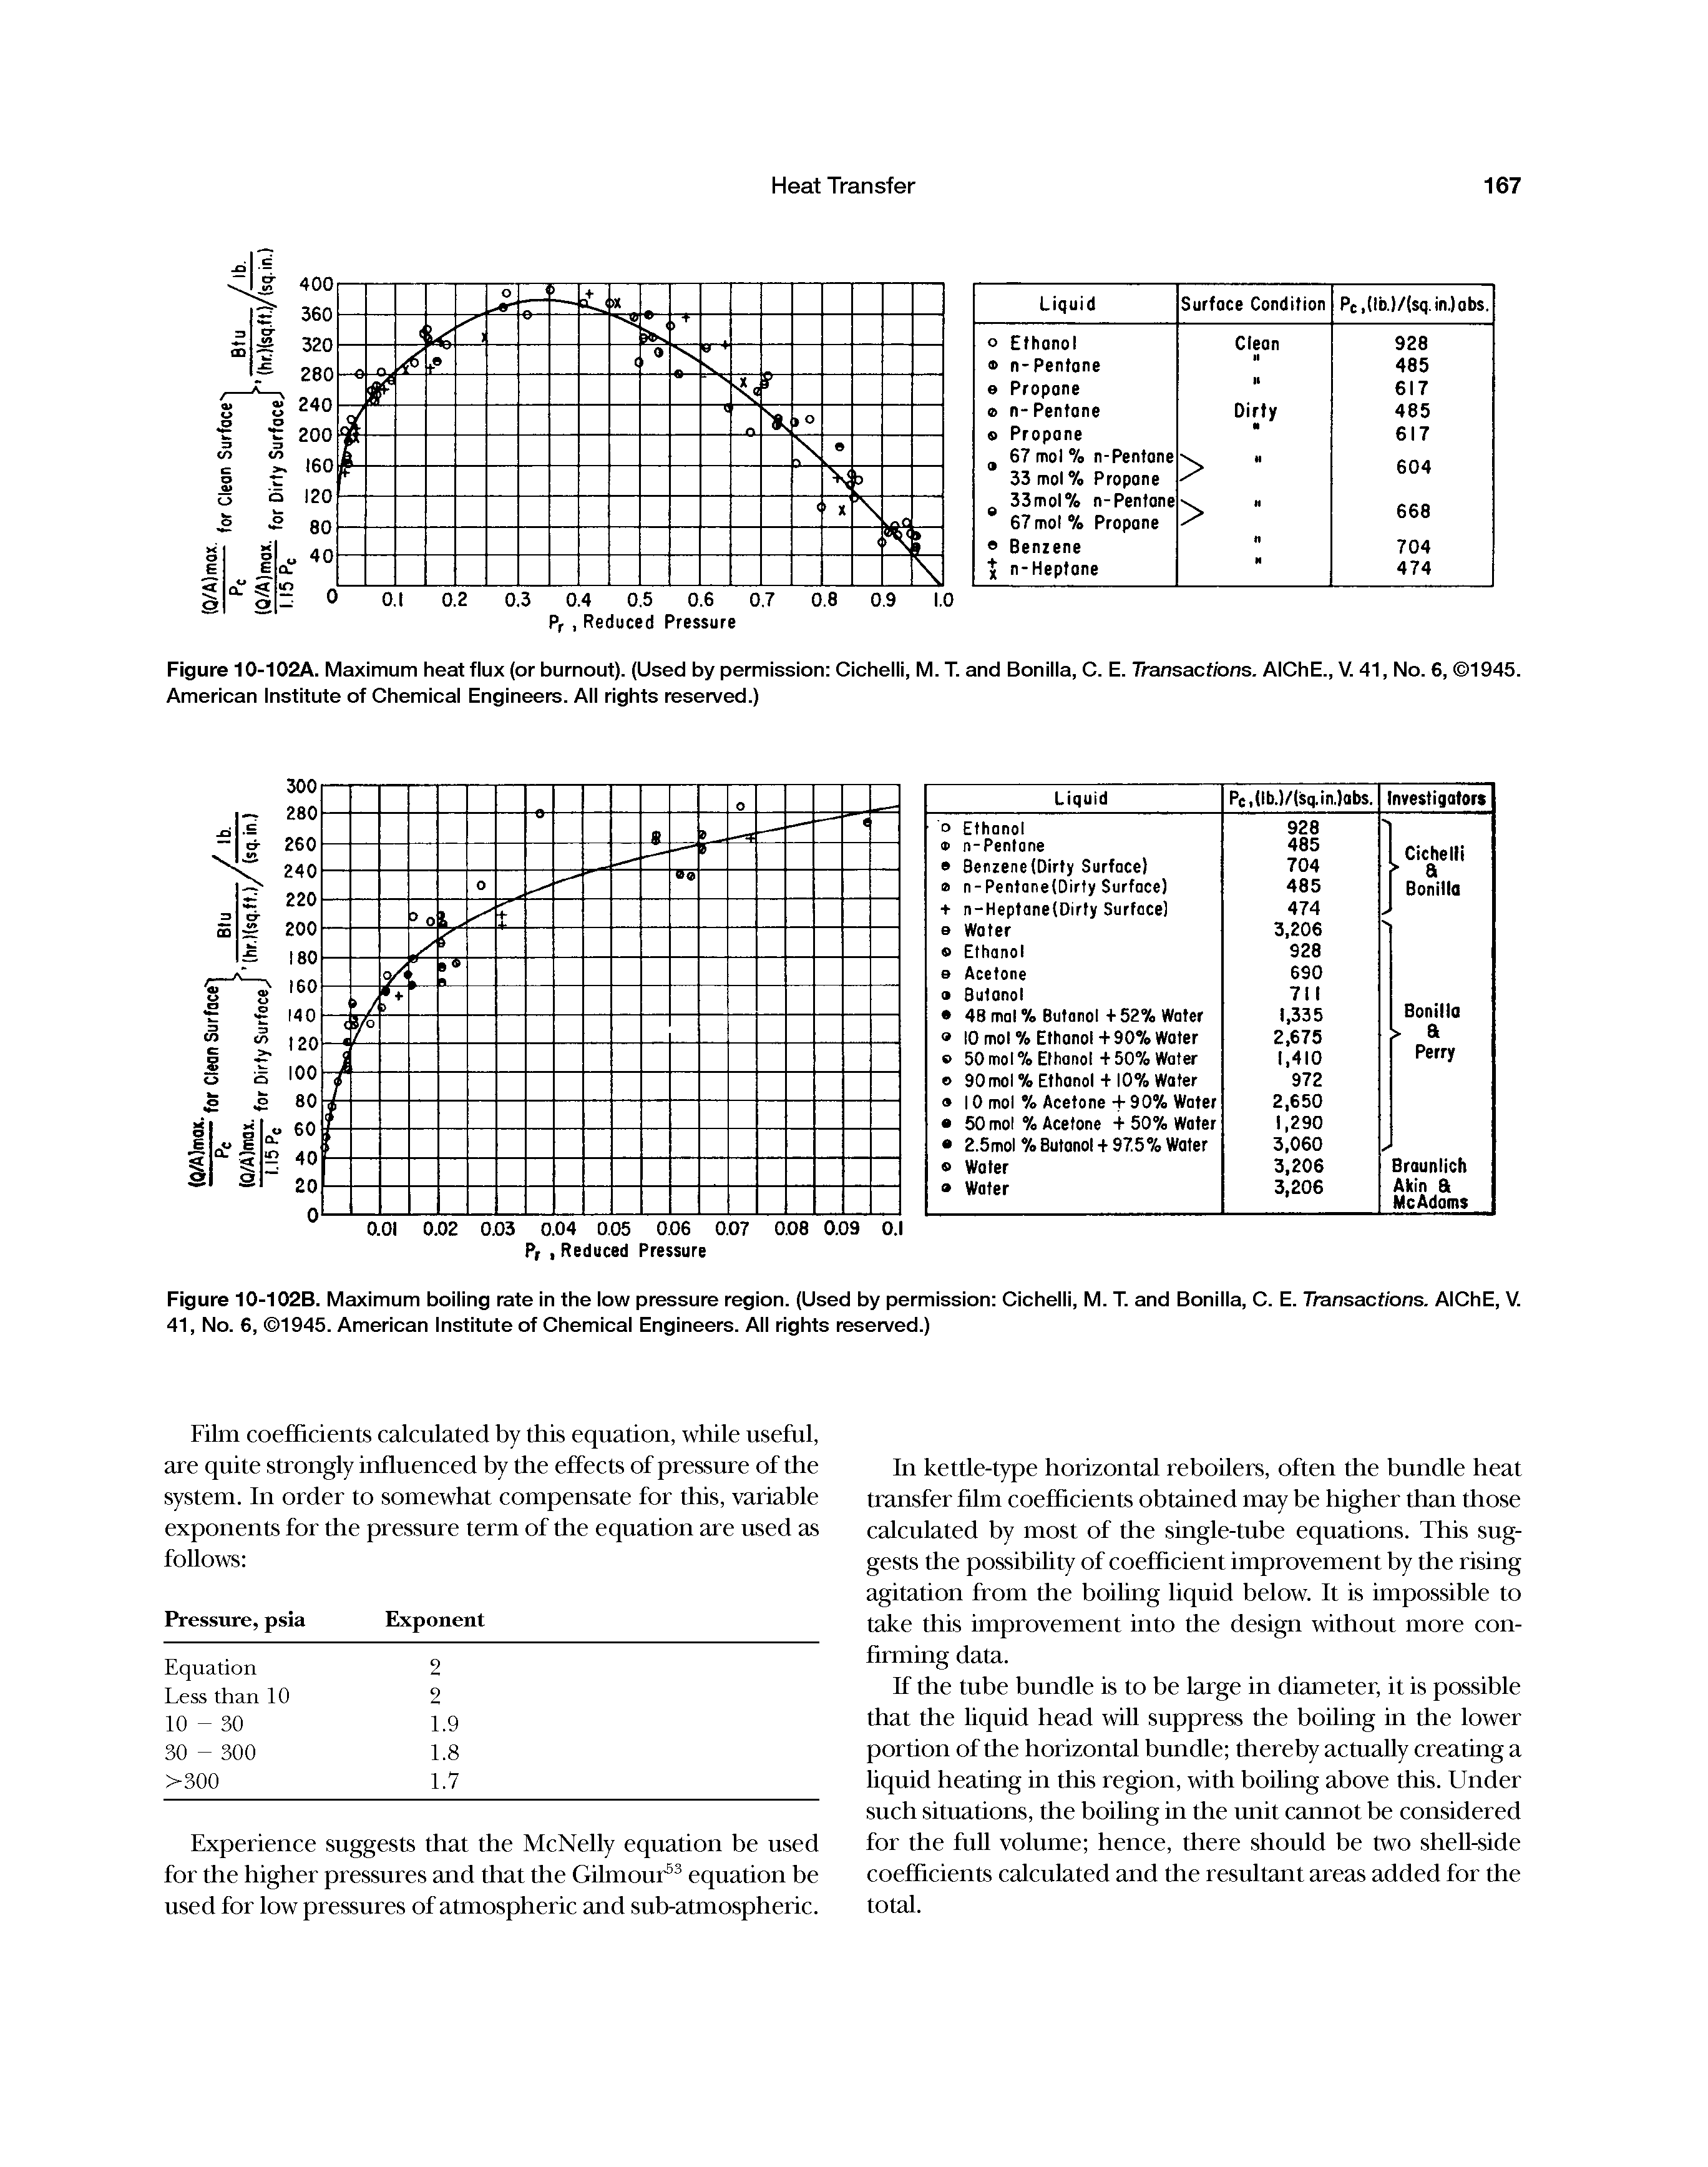 Figure 10-102B. Maximum boiling rate in the low pressure region. (Used by permission Cichelli, M. T. and Bonilla, C. E. Transactions. AlChE, V. 41, No. 6, 1945. American Institute of Chemical Engineers. All rights reserved.)...